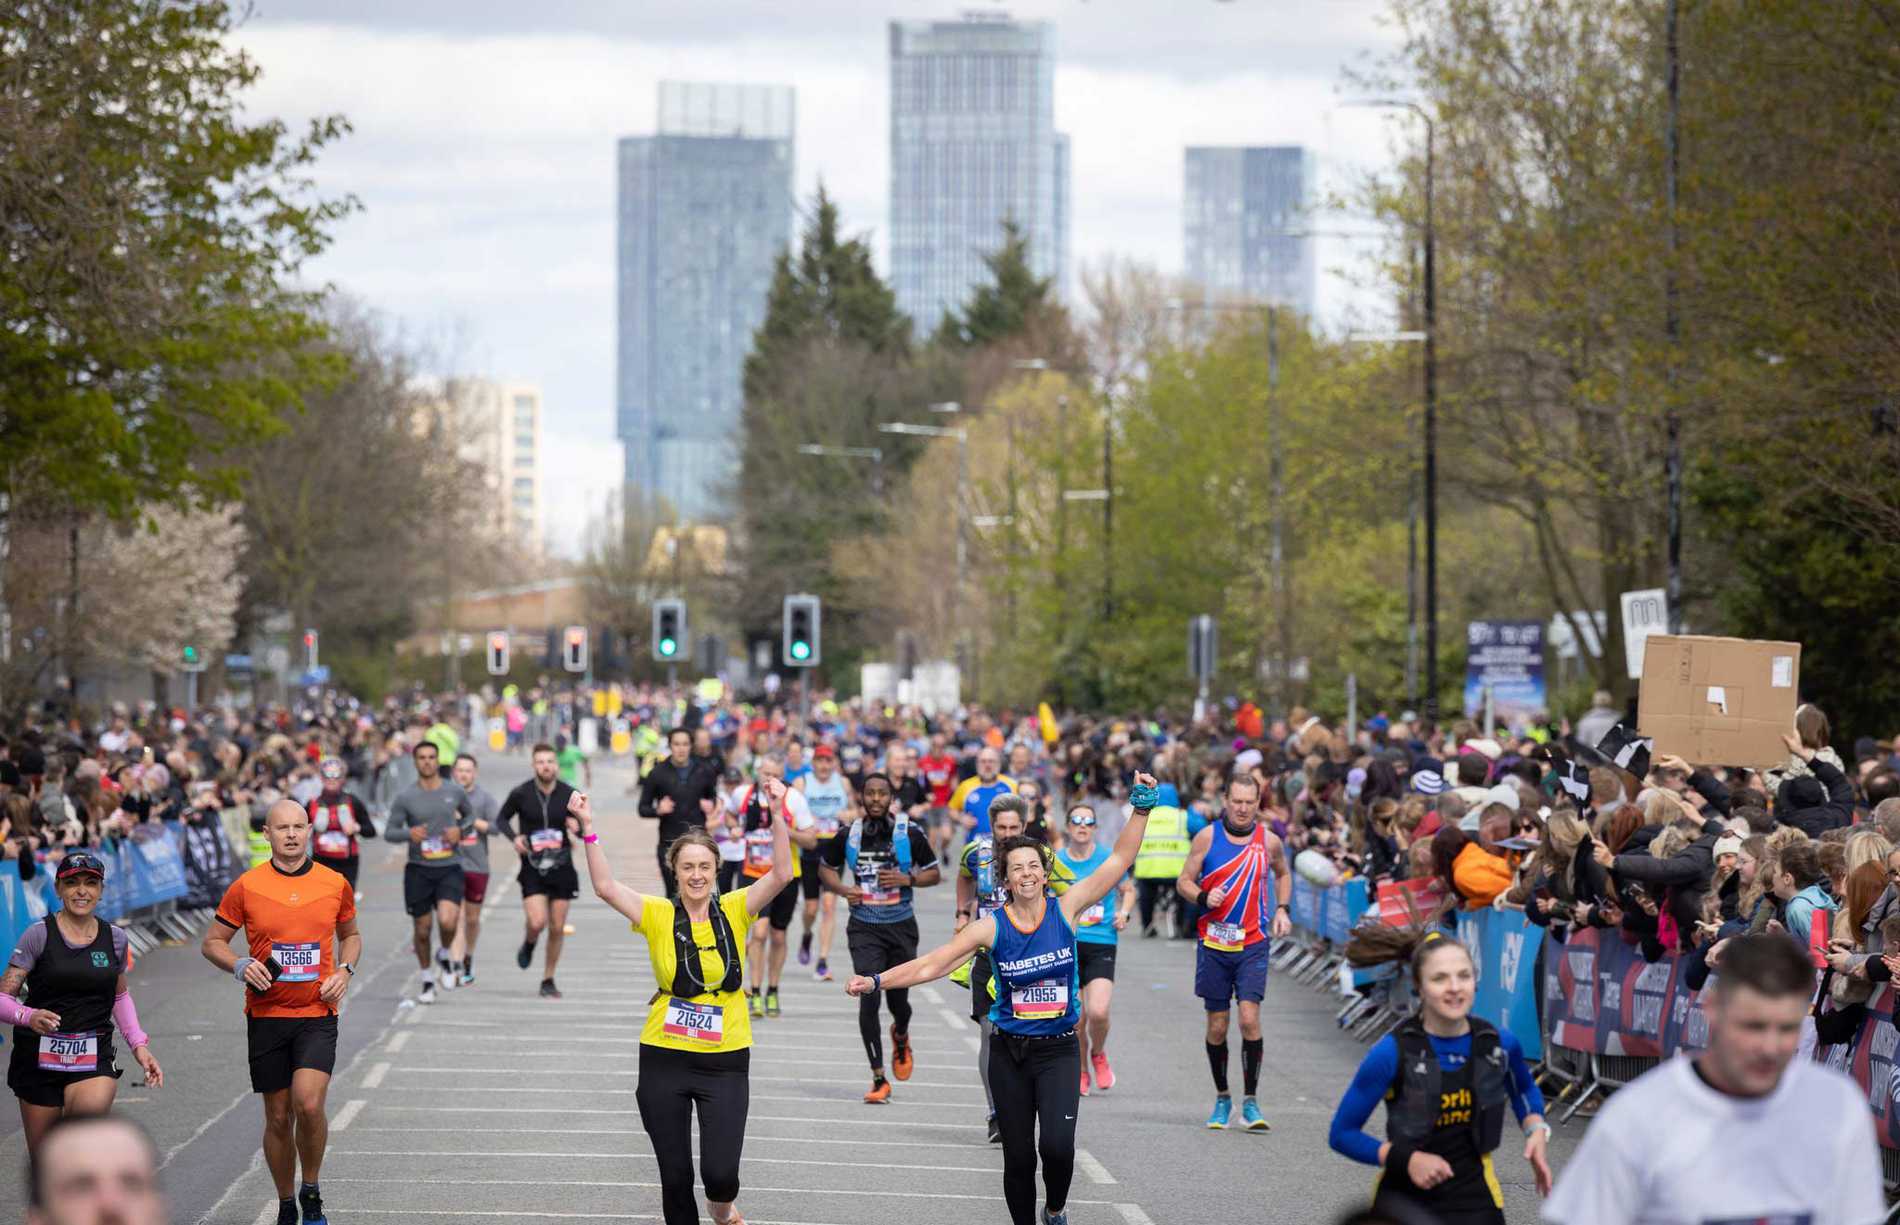 Manchester Marathon runners with the city's skyline in the background.